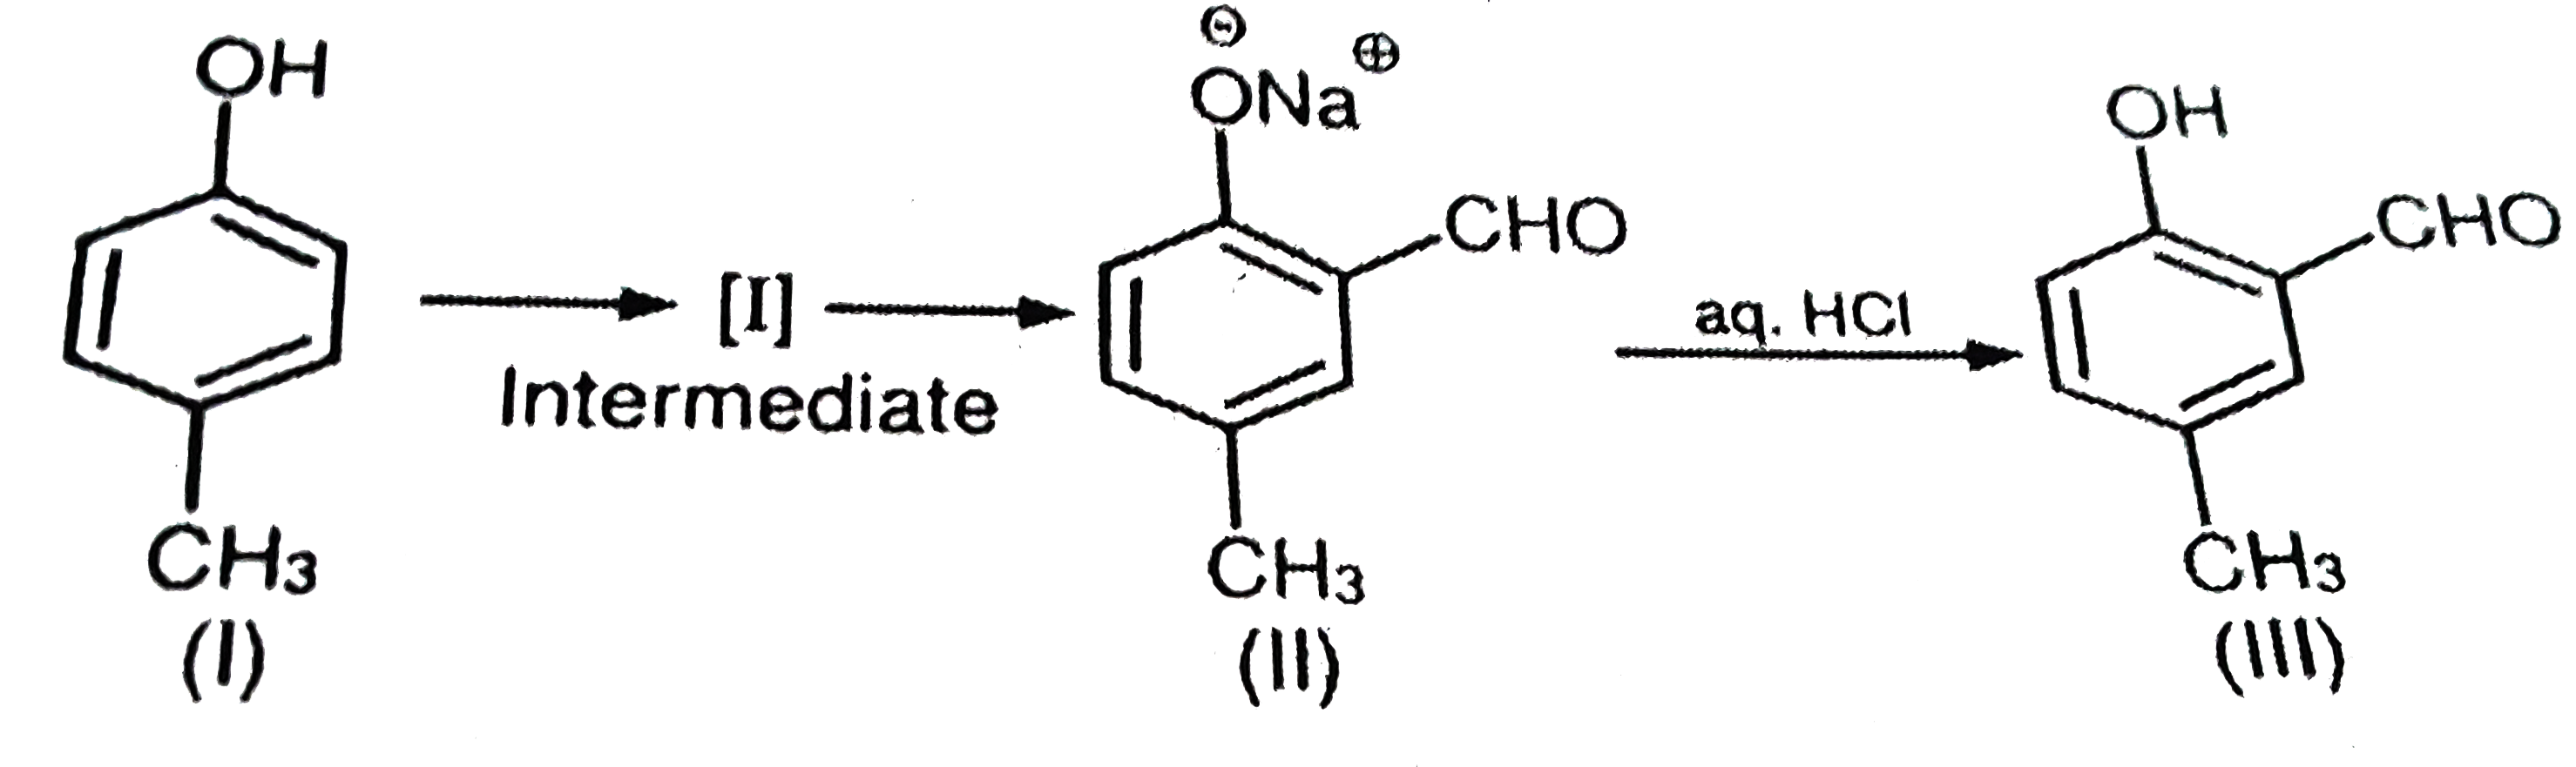 Riemer-Tiemann reaction intorduces an aldehyde group, on to the aromatic ring of phenol, ortho to the hydroxyl group. This reaction involves electrophilic aromatic substitution. This is a general method for the synthesis of substitued salicyladehydes as depicted below.      The structure of the intermediate I is: